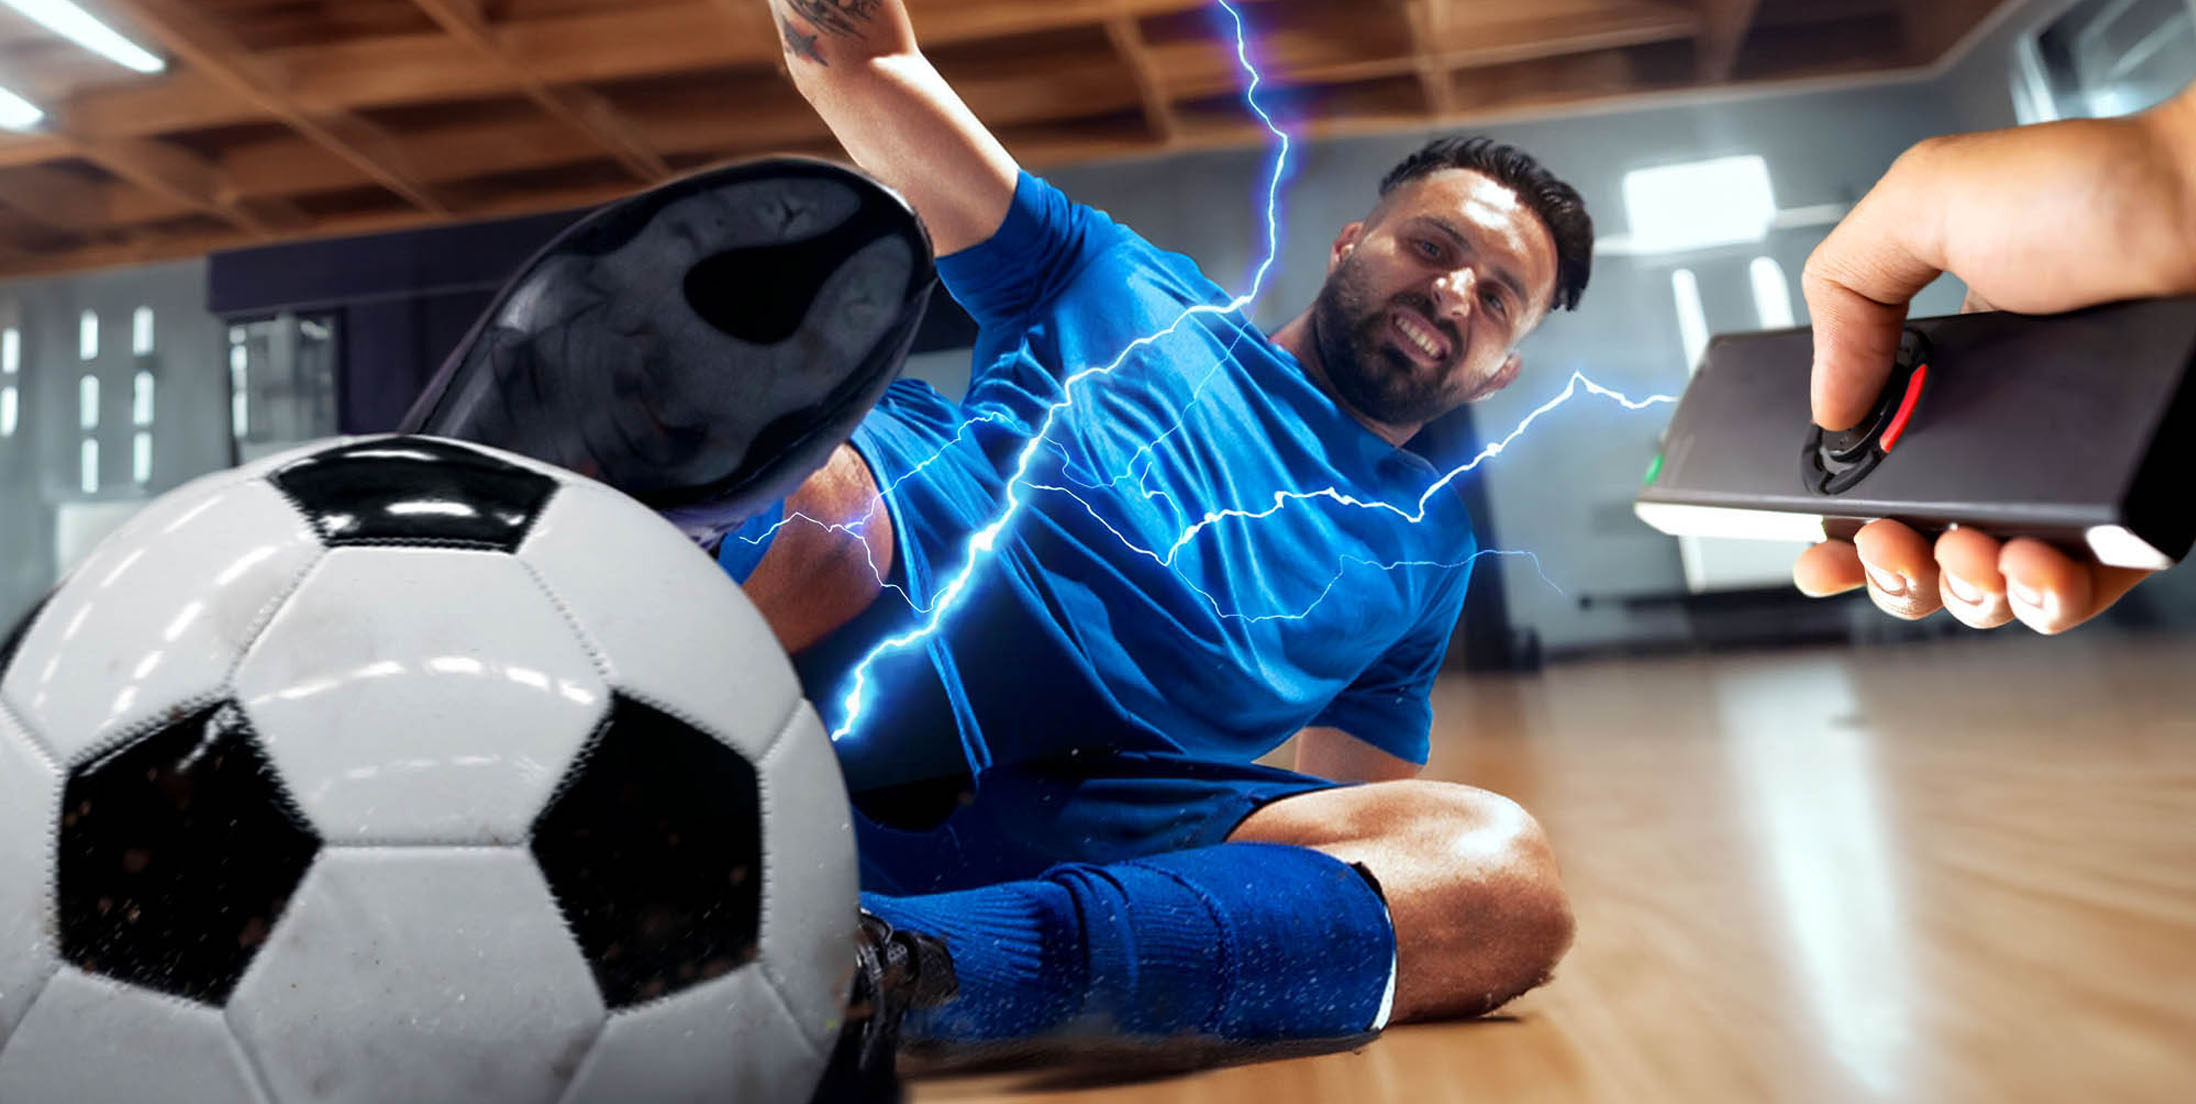 Top Stag Do Ideas & Activities - Electric Shock Football